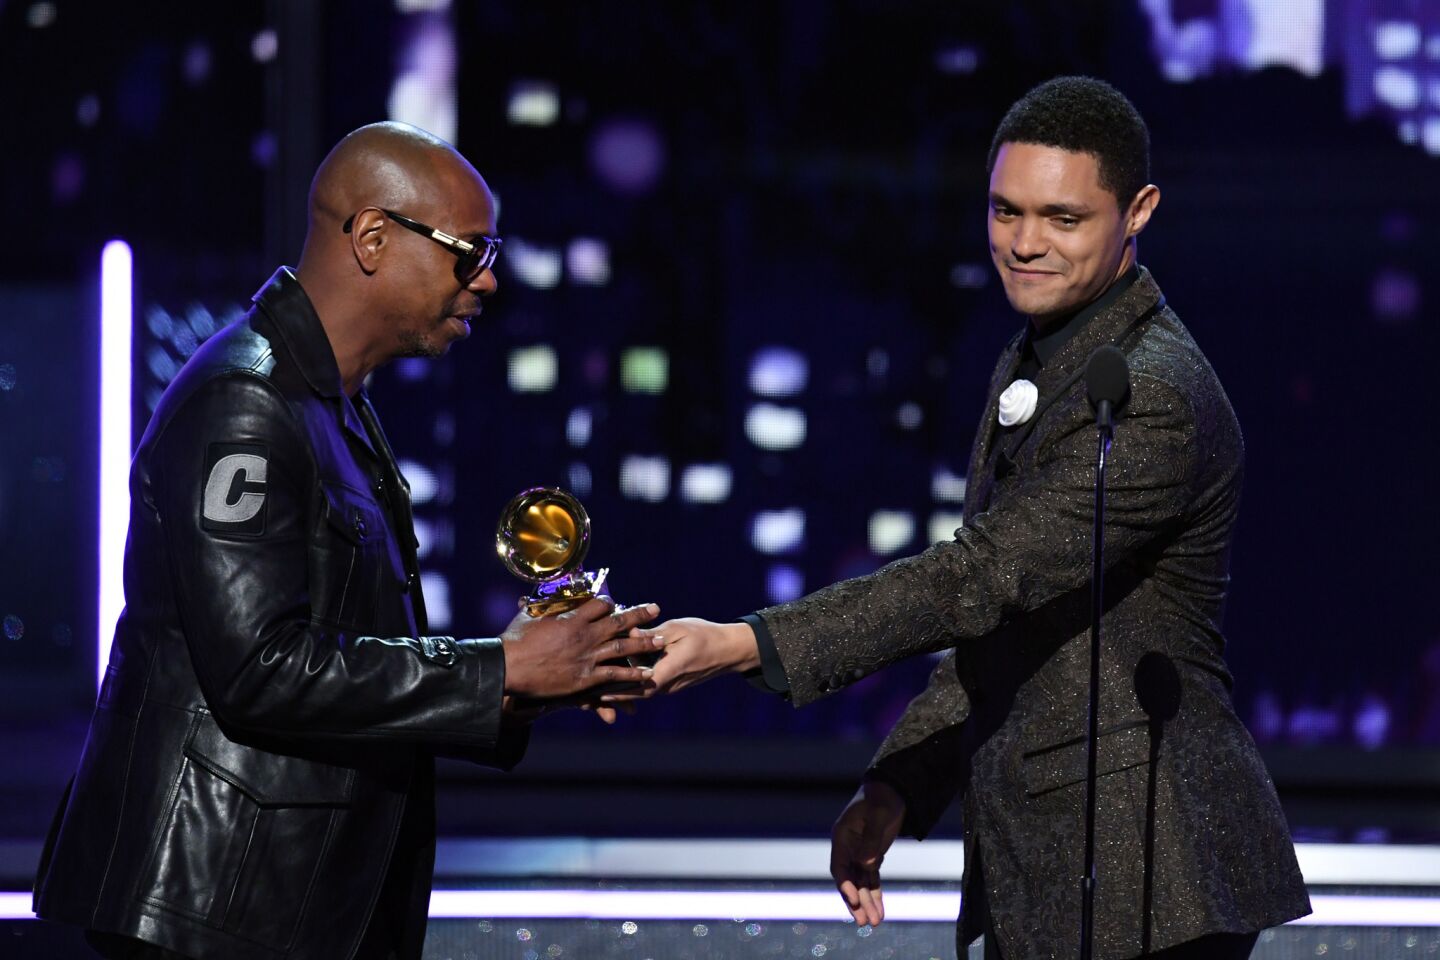 Comedian Dave Chappelle, left, accepts the comedy album Grammy for "The Age of Spin & Deep in the Heart of Texas" from Trevor Noah, right.